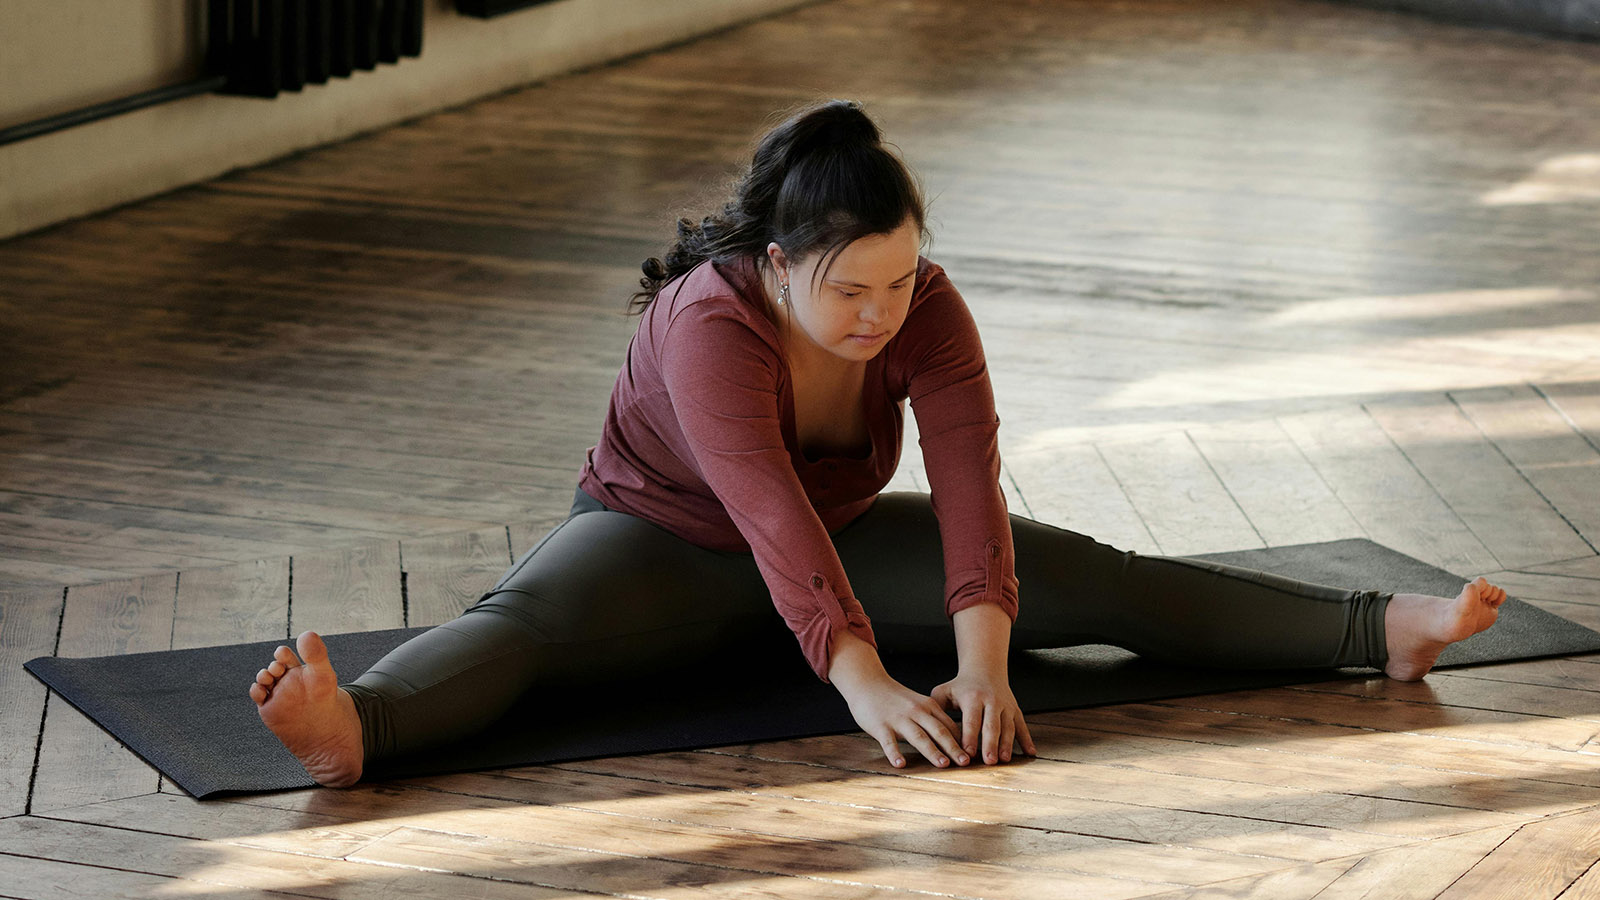 a woman with Down syndrome stretches on a yoga mat